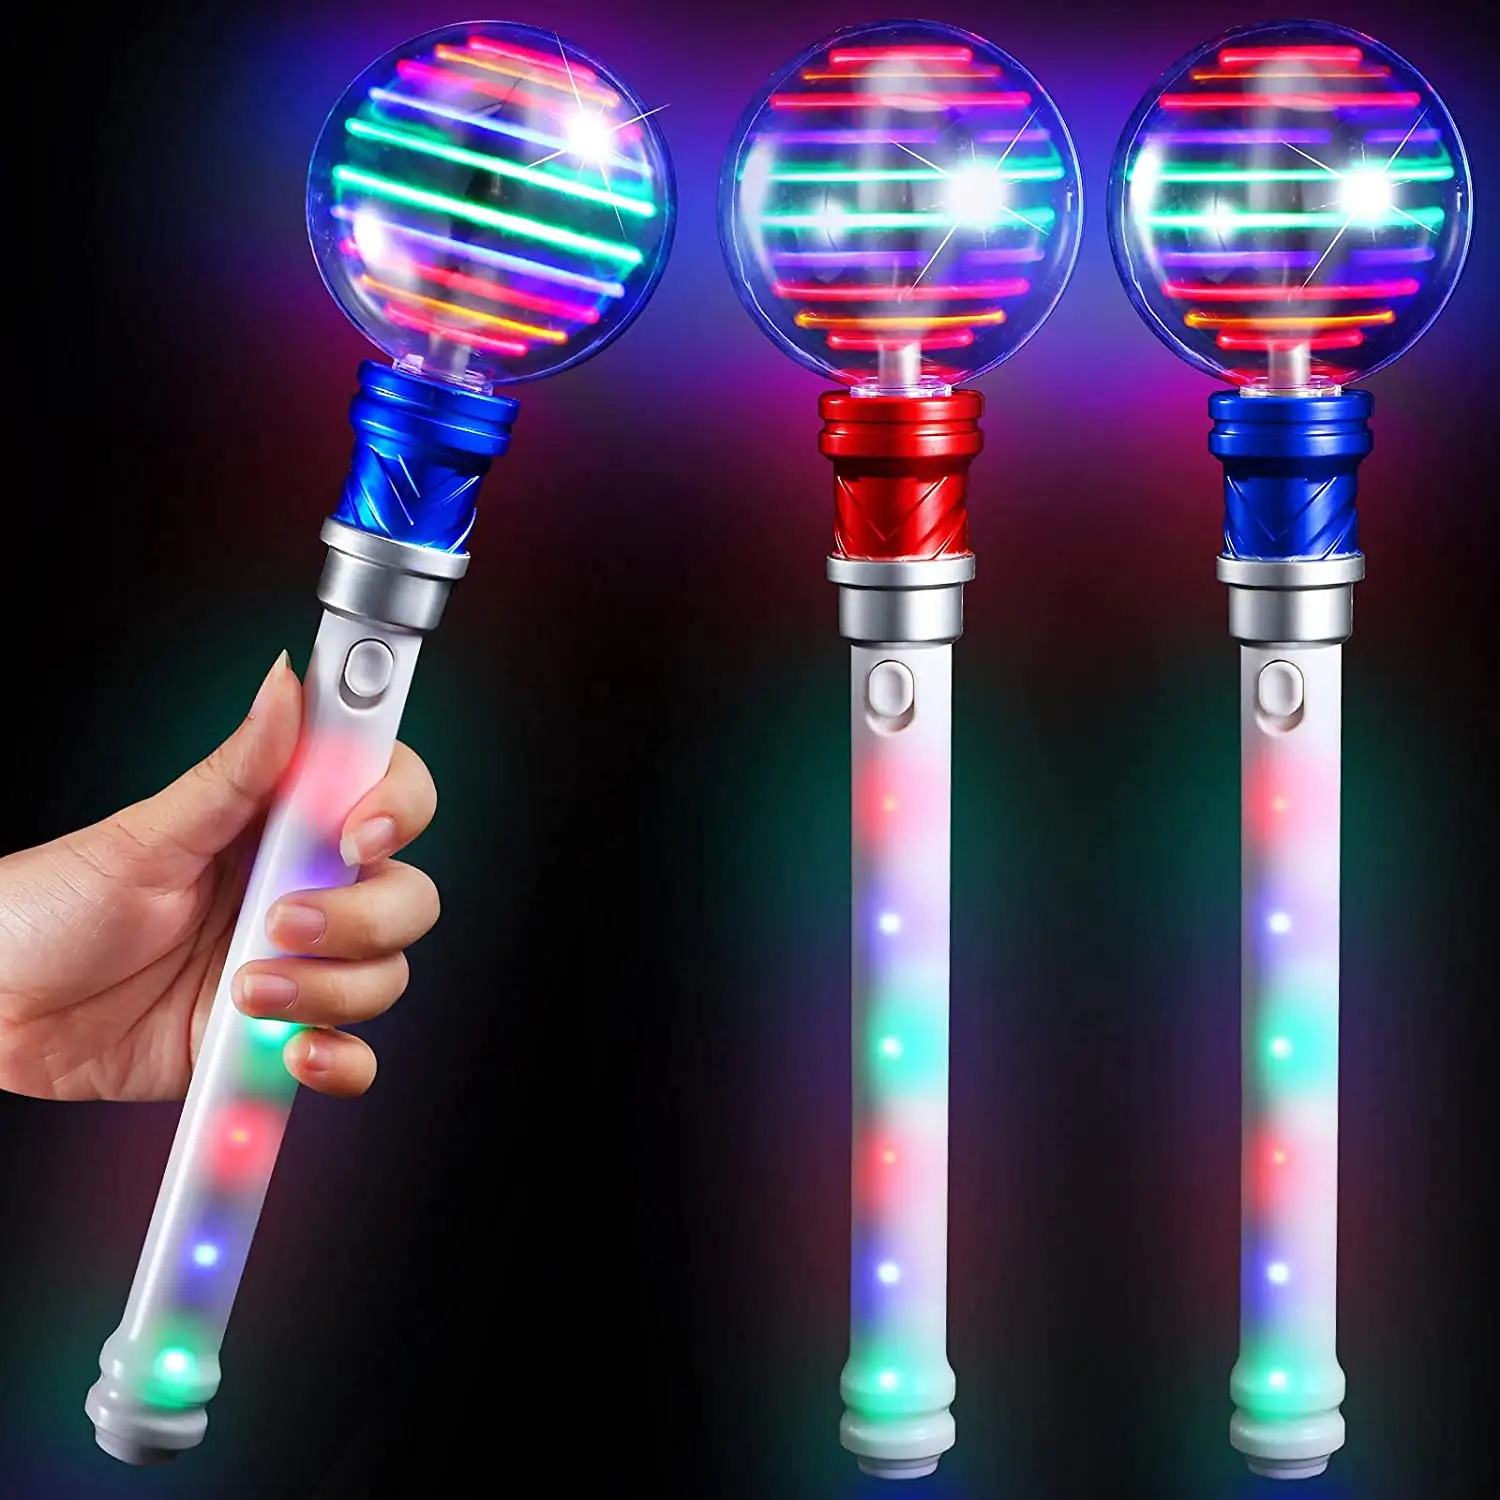 Spinning Magic Ball Wand Inch LED Spin Toy for Kids with Batteries Included Great Gift Idea for Boys and Girls Fun Birthday